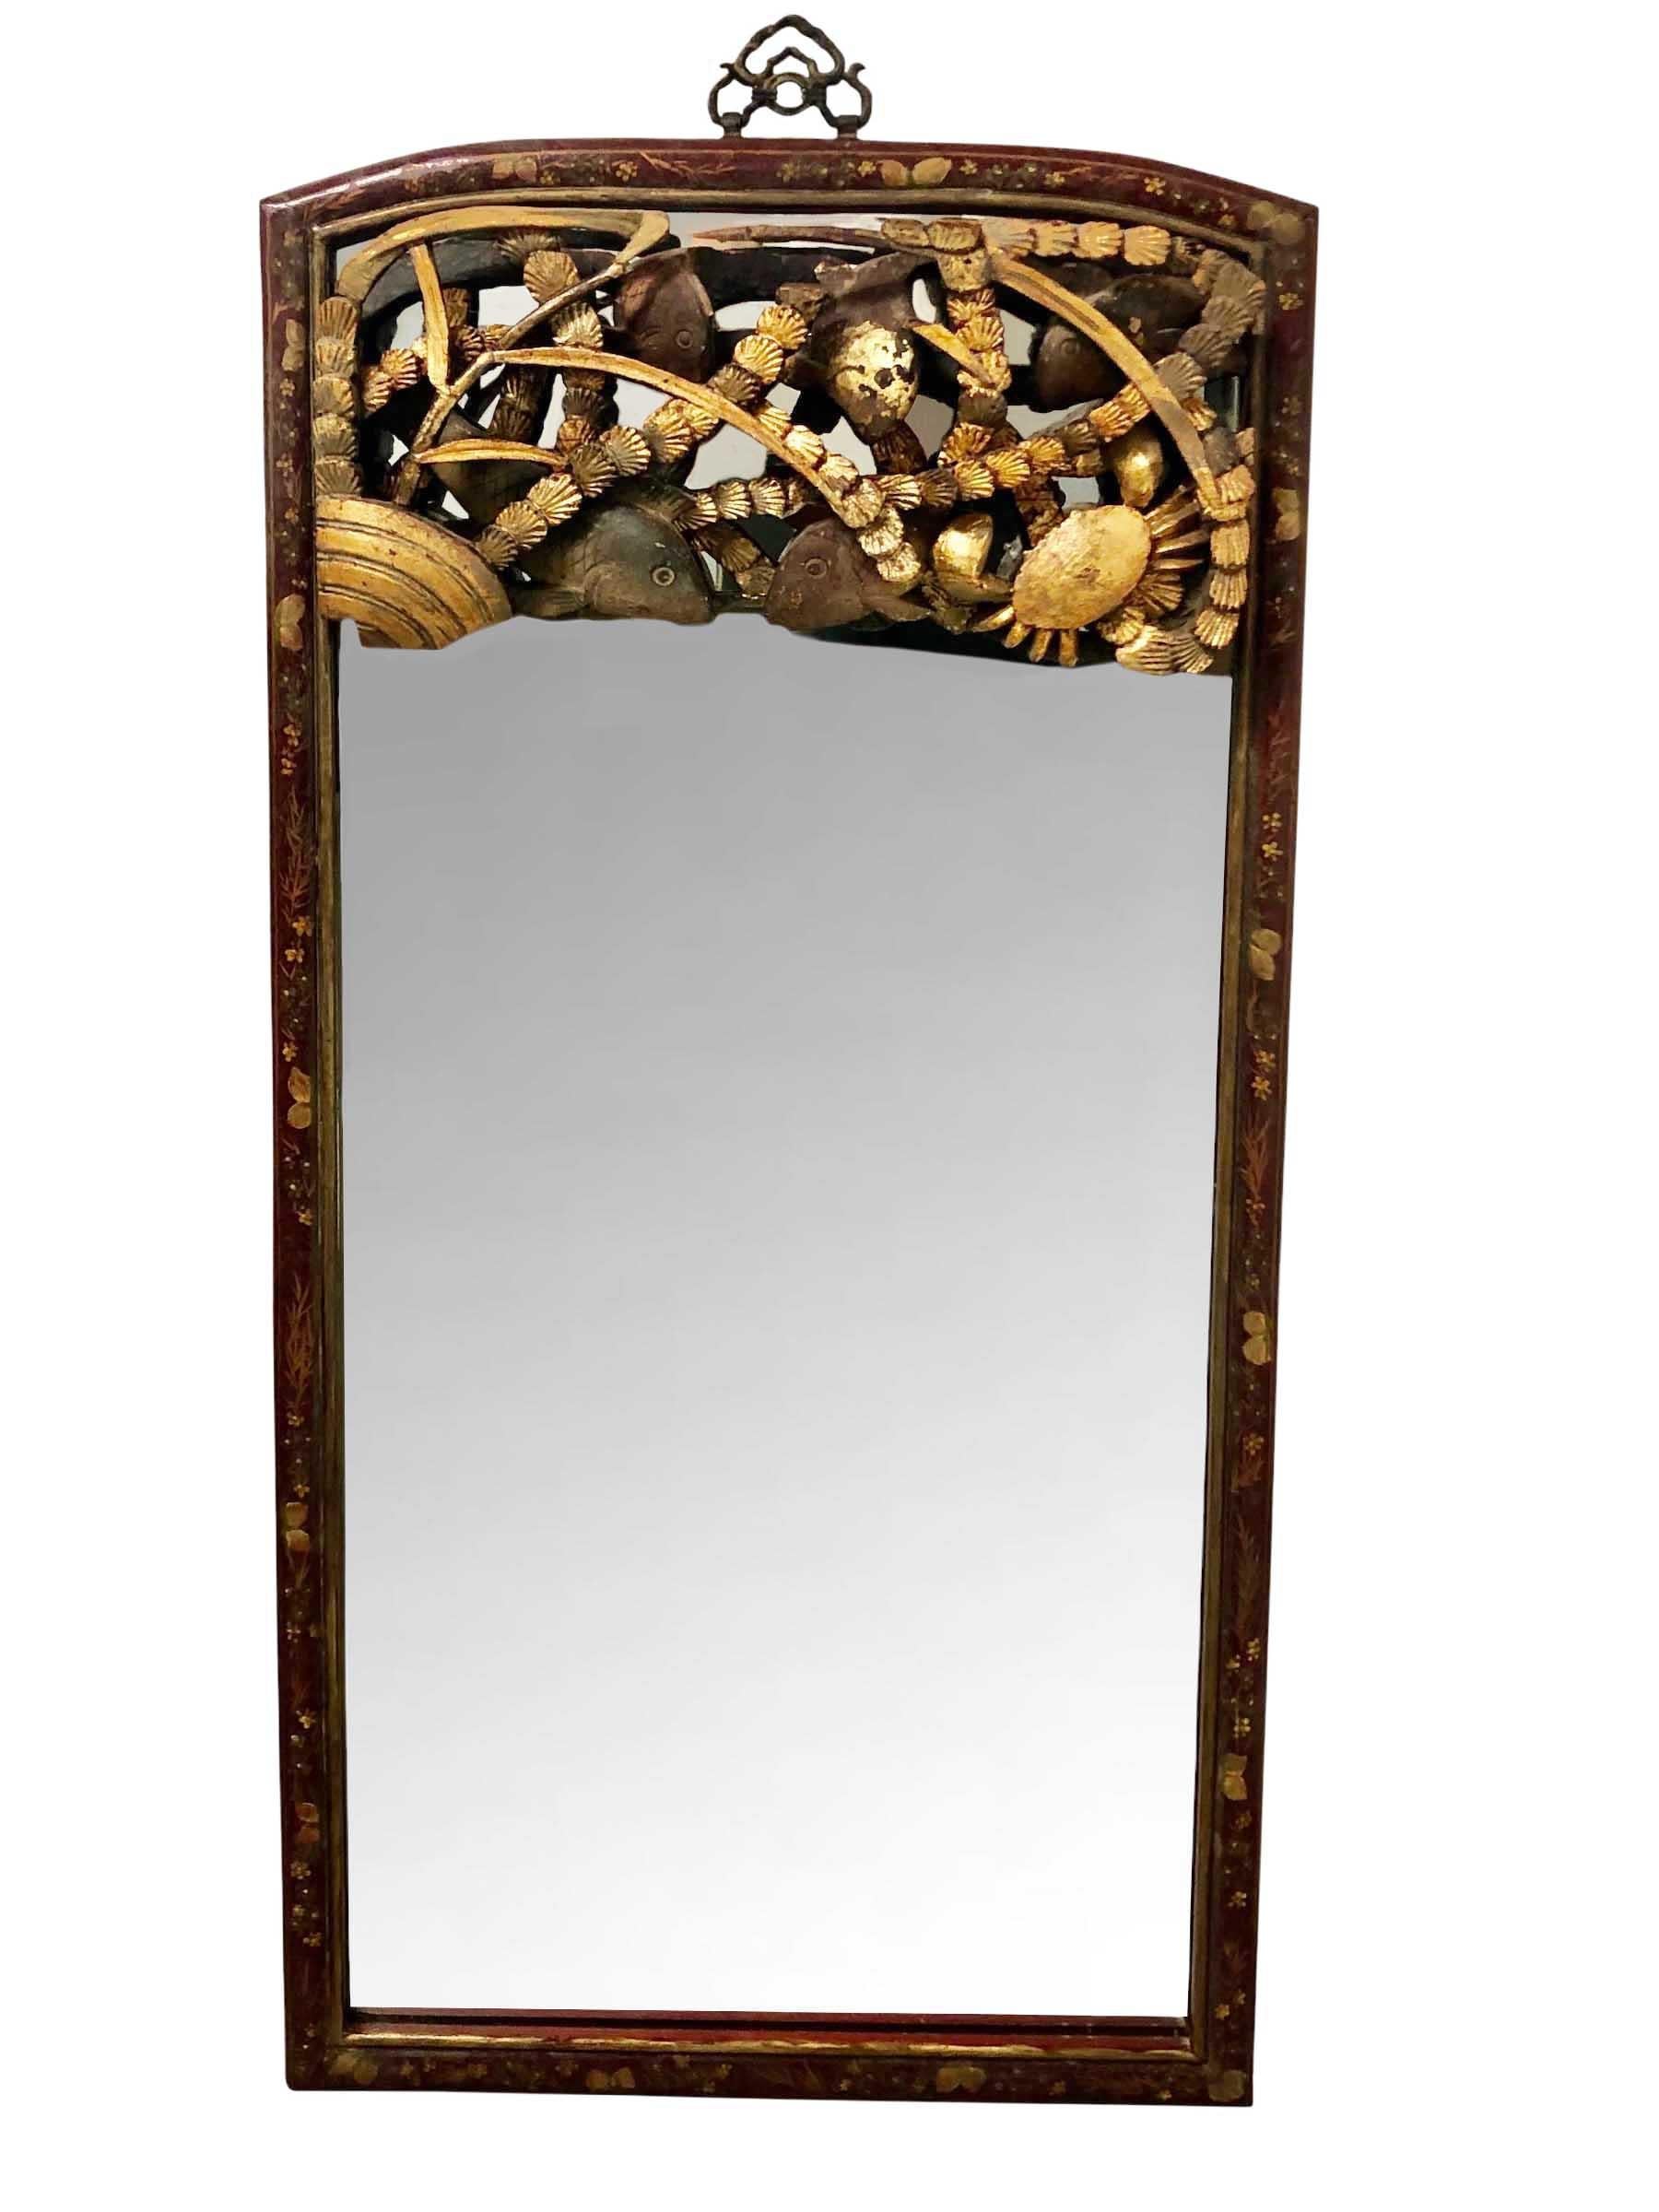 1900s hand painted mirror with pomegranates and flowers in the Chinese taste surround the mirror. An early 19th century gold fragment of koi fish, crab and seaweed is at the top. There's a decorative brass holder for hanging.